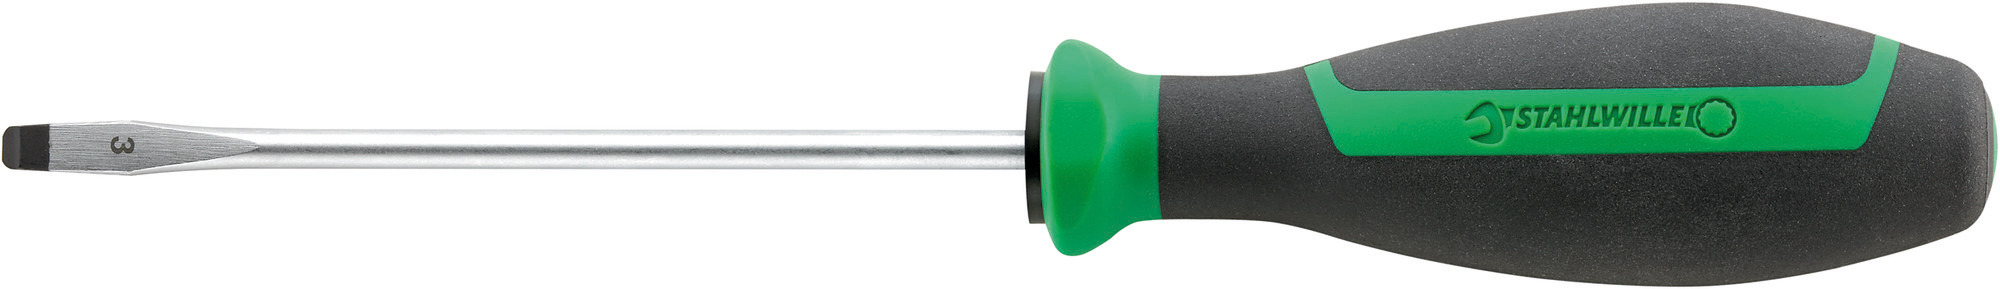 Screwdrivers for Slotted Screws | DRALL 4621